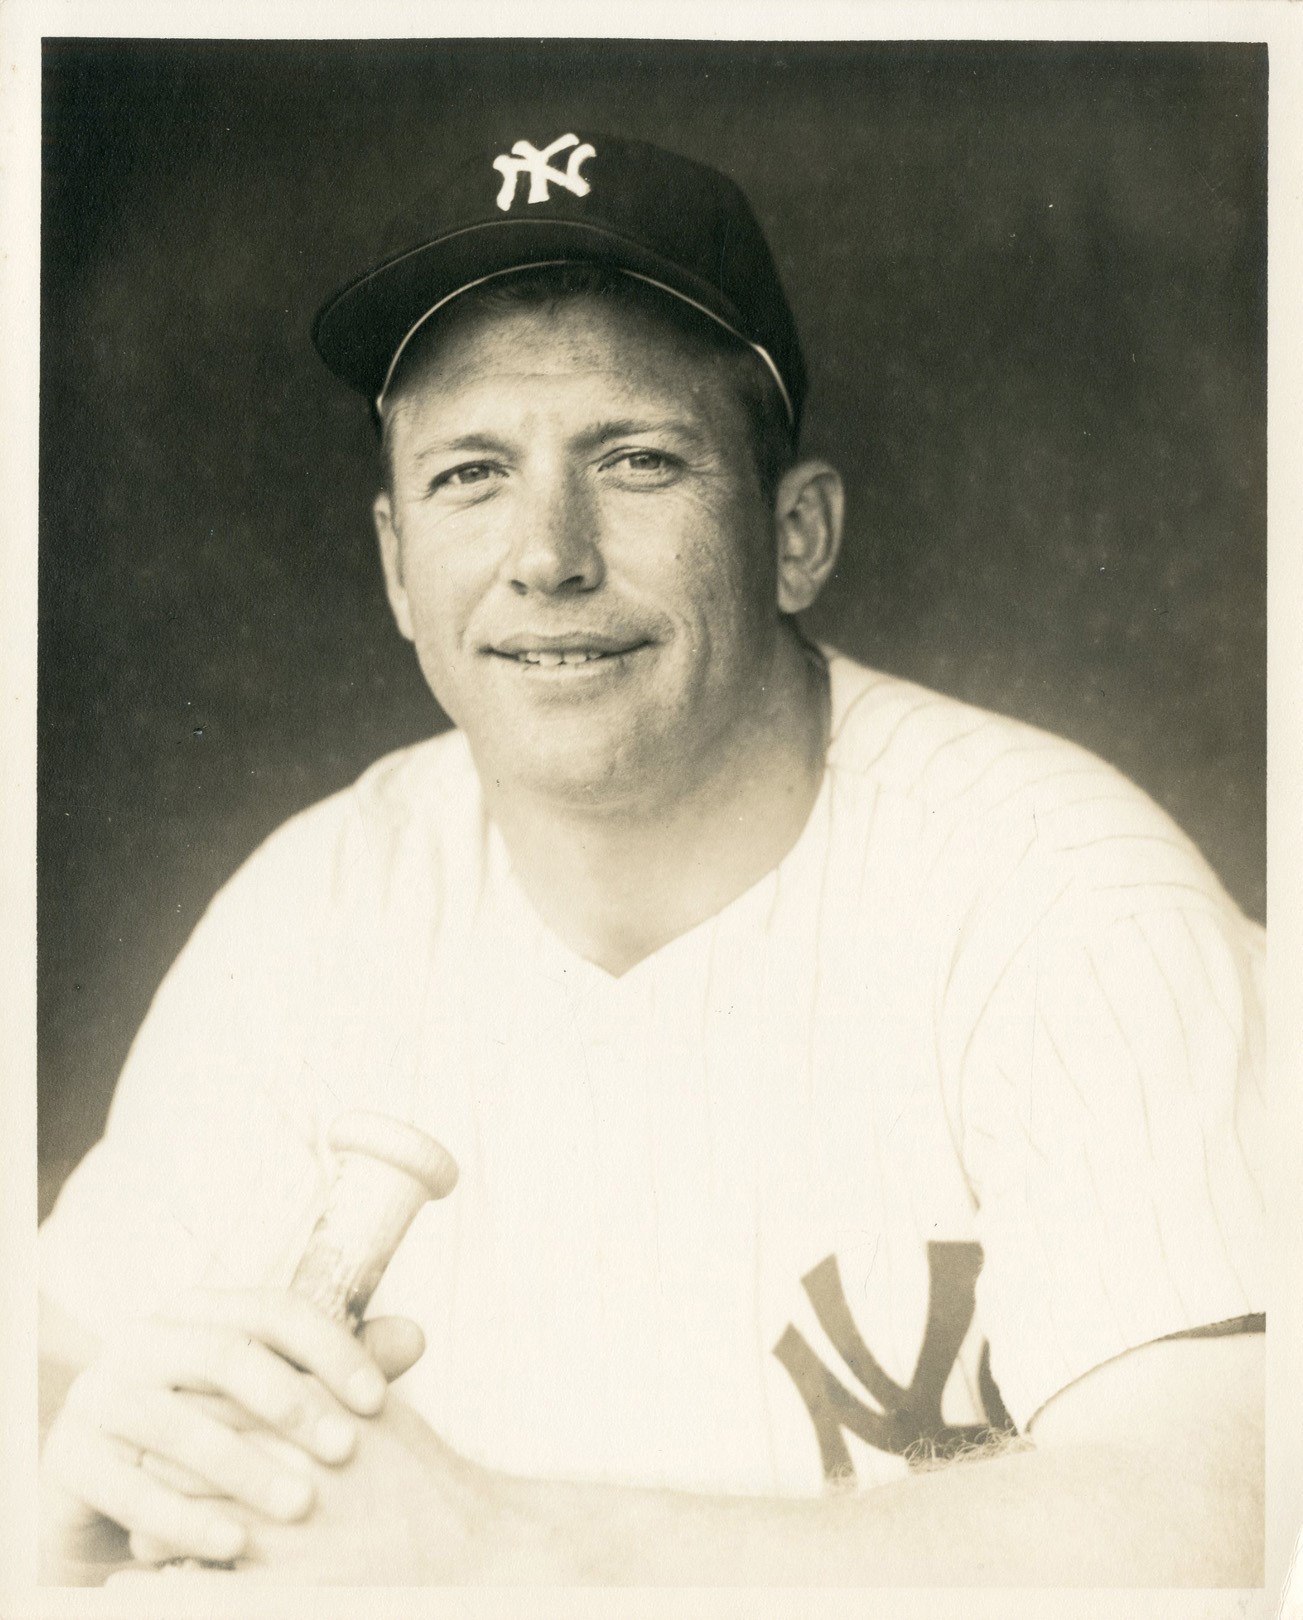 Mantle and Maris - Classic Mickey Mantle Portrait Photograph (PSA/DNA Type I LOA)